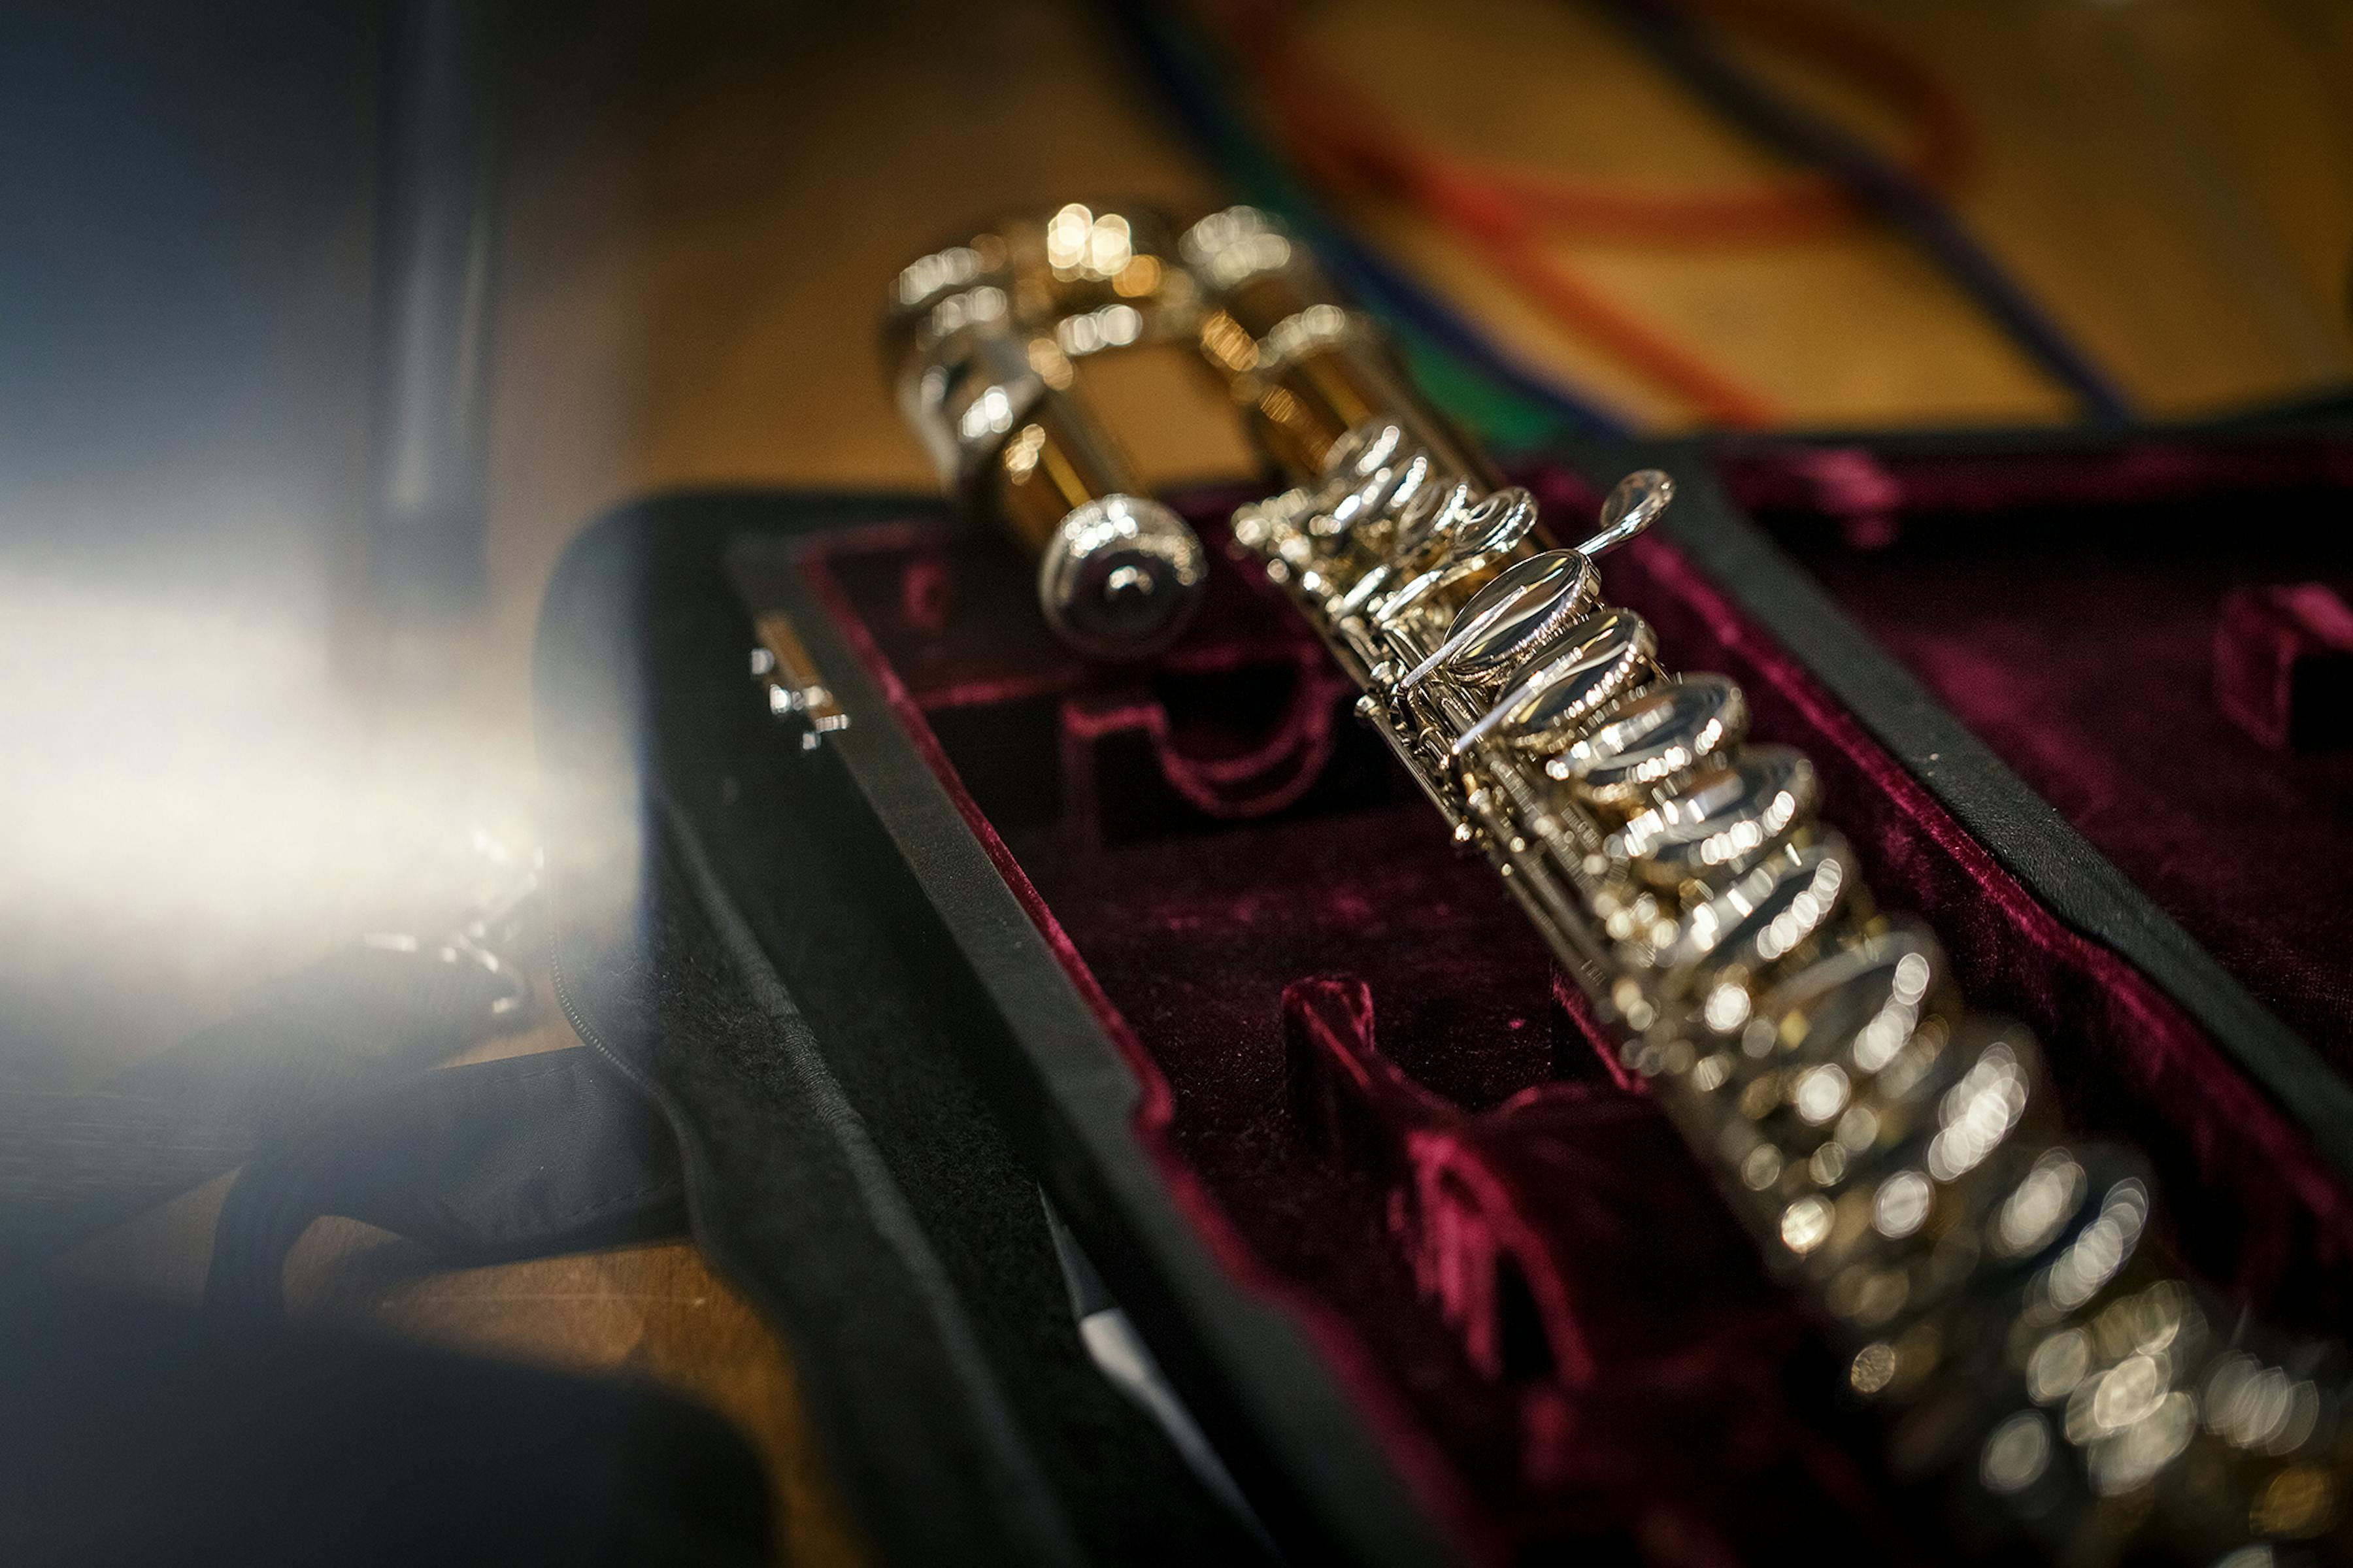 A flute in its case